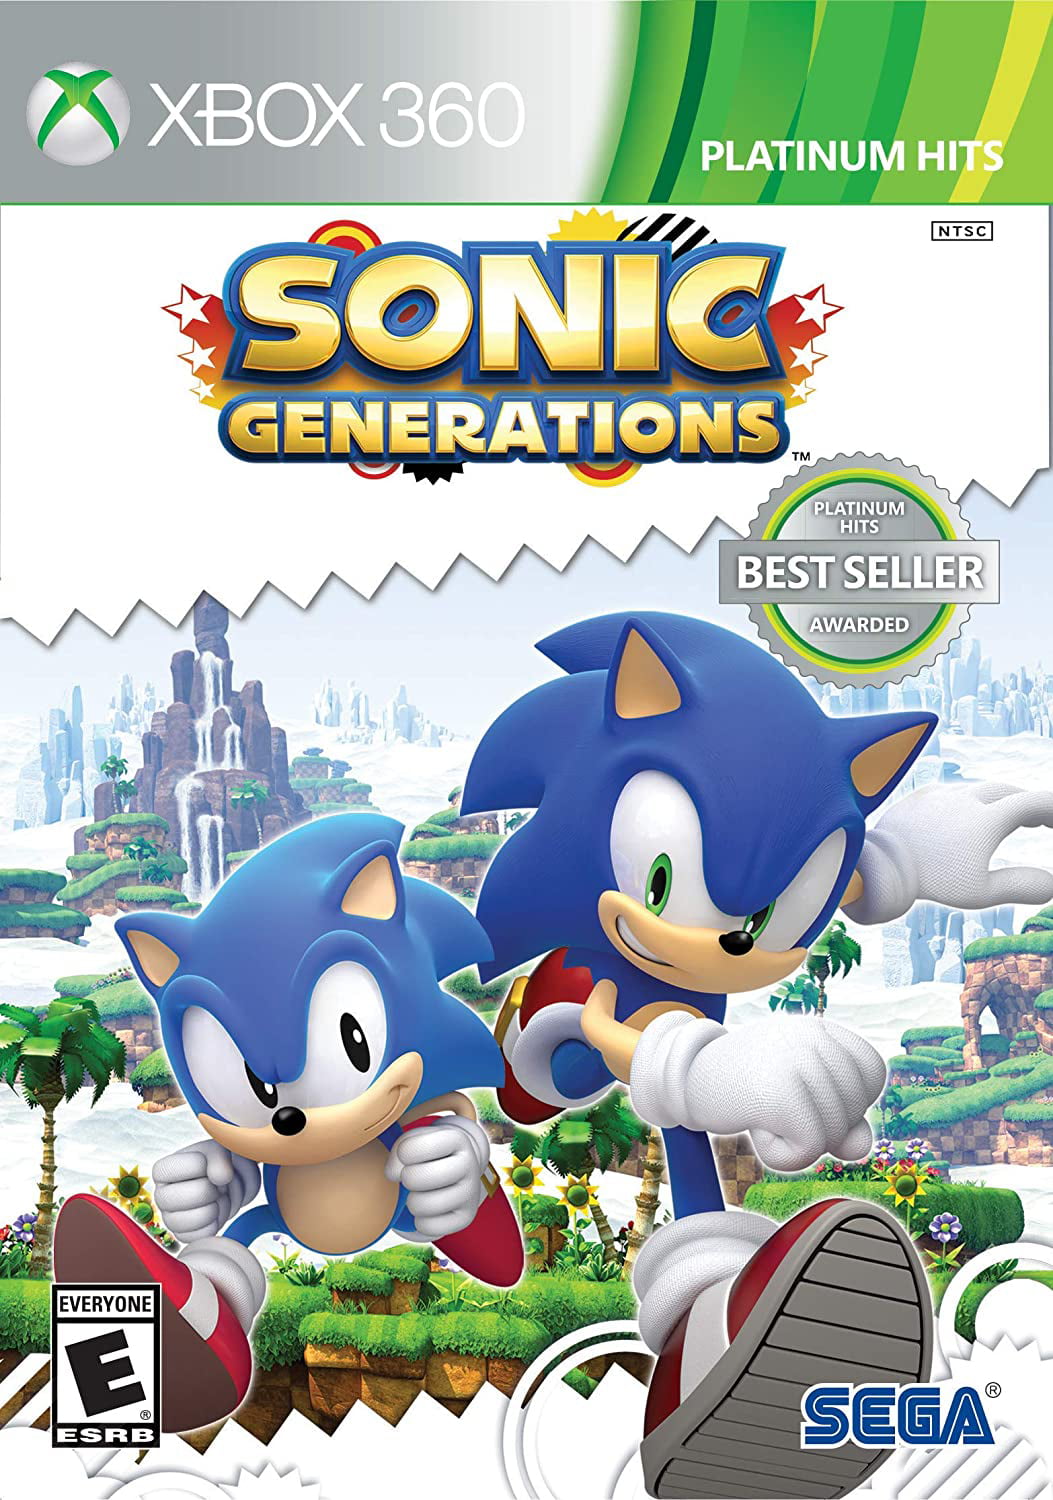 sonic generations characters